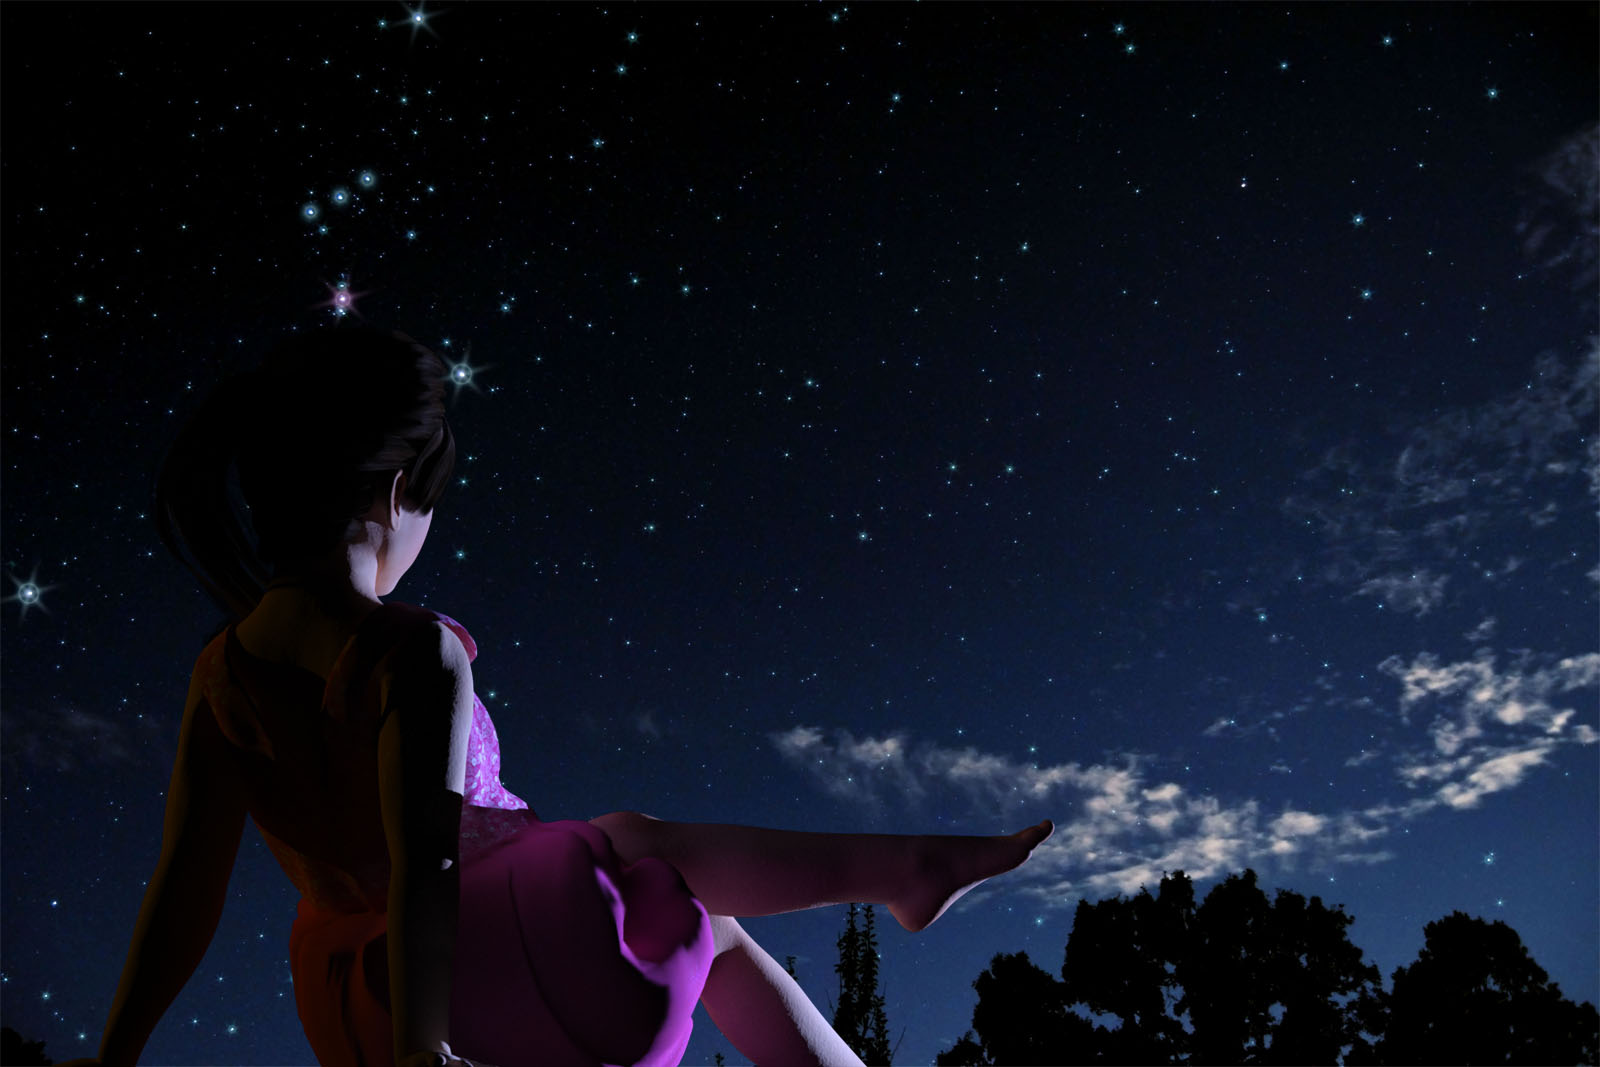 Diva is lost in the stars, gazing at the moonset and watching the night sky.